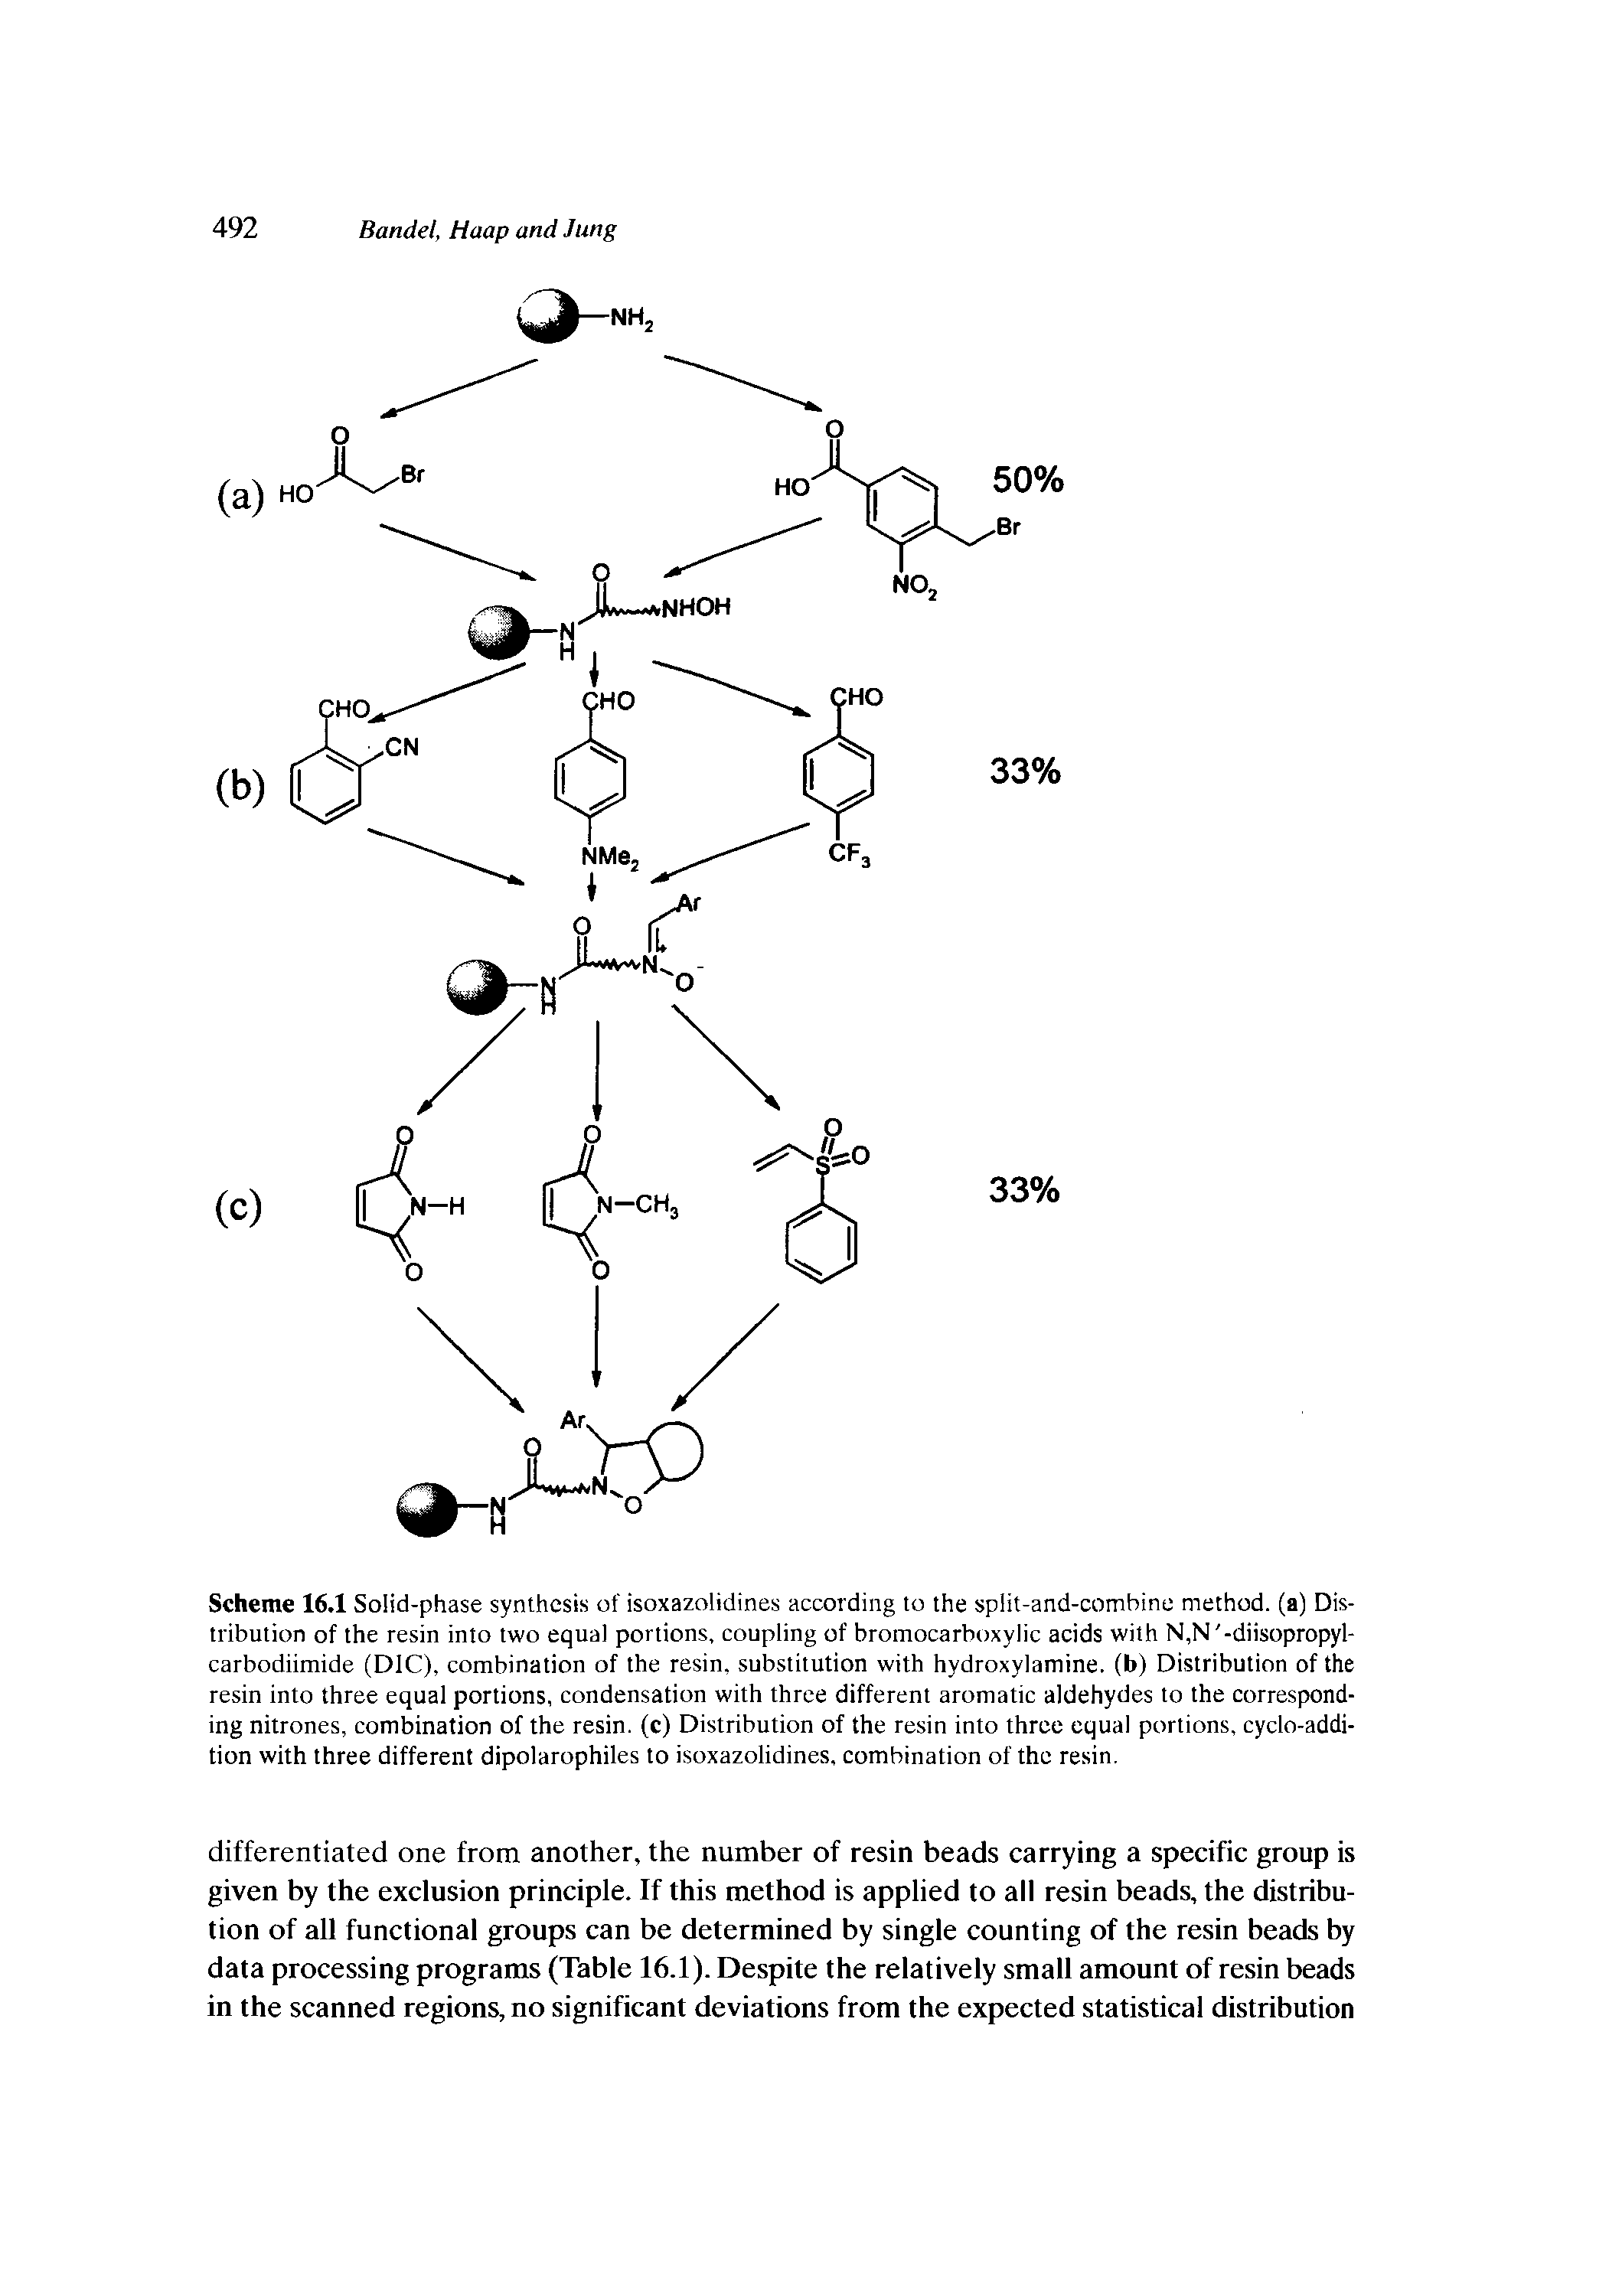 Scheme 16.1 Solid-phase synthesis of isoxazolidines according to the split-and-combine method, (a) Distribution of the resin into two equal portions, coupling of bromocarboxylic acids with N,N -diisopropyl-carbodiimide (D1C), combination of the resin, substitution with hydroxylamine. (b) Distribution of the resin into three equal portions, condensation with three different aromatic aldehydes to the corresponding nitrones, combination of the resin, (c) Distribution of the resin into three equal portions, cyclo-addition with three different dipolarophiles to isoxazolidines, combination of the resin.